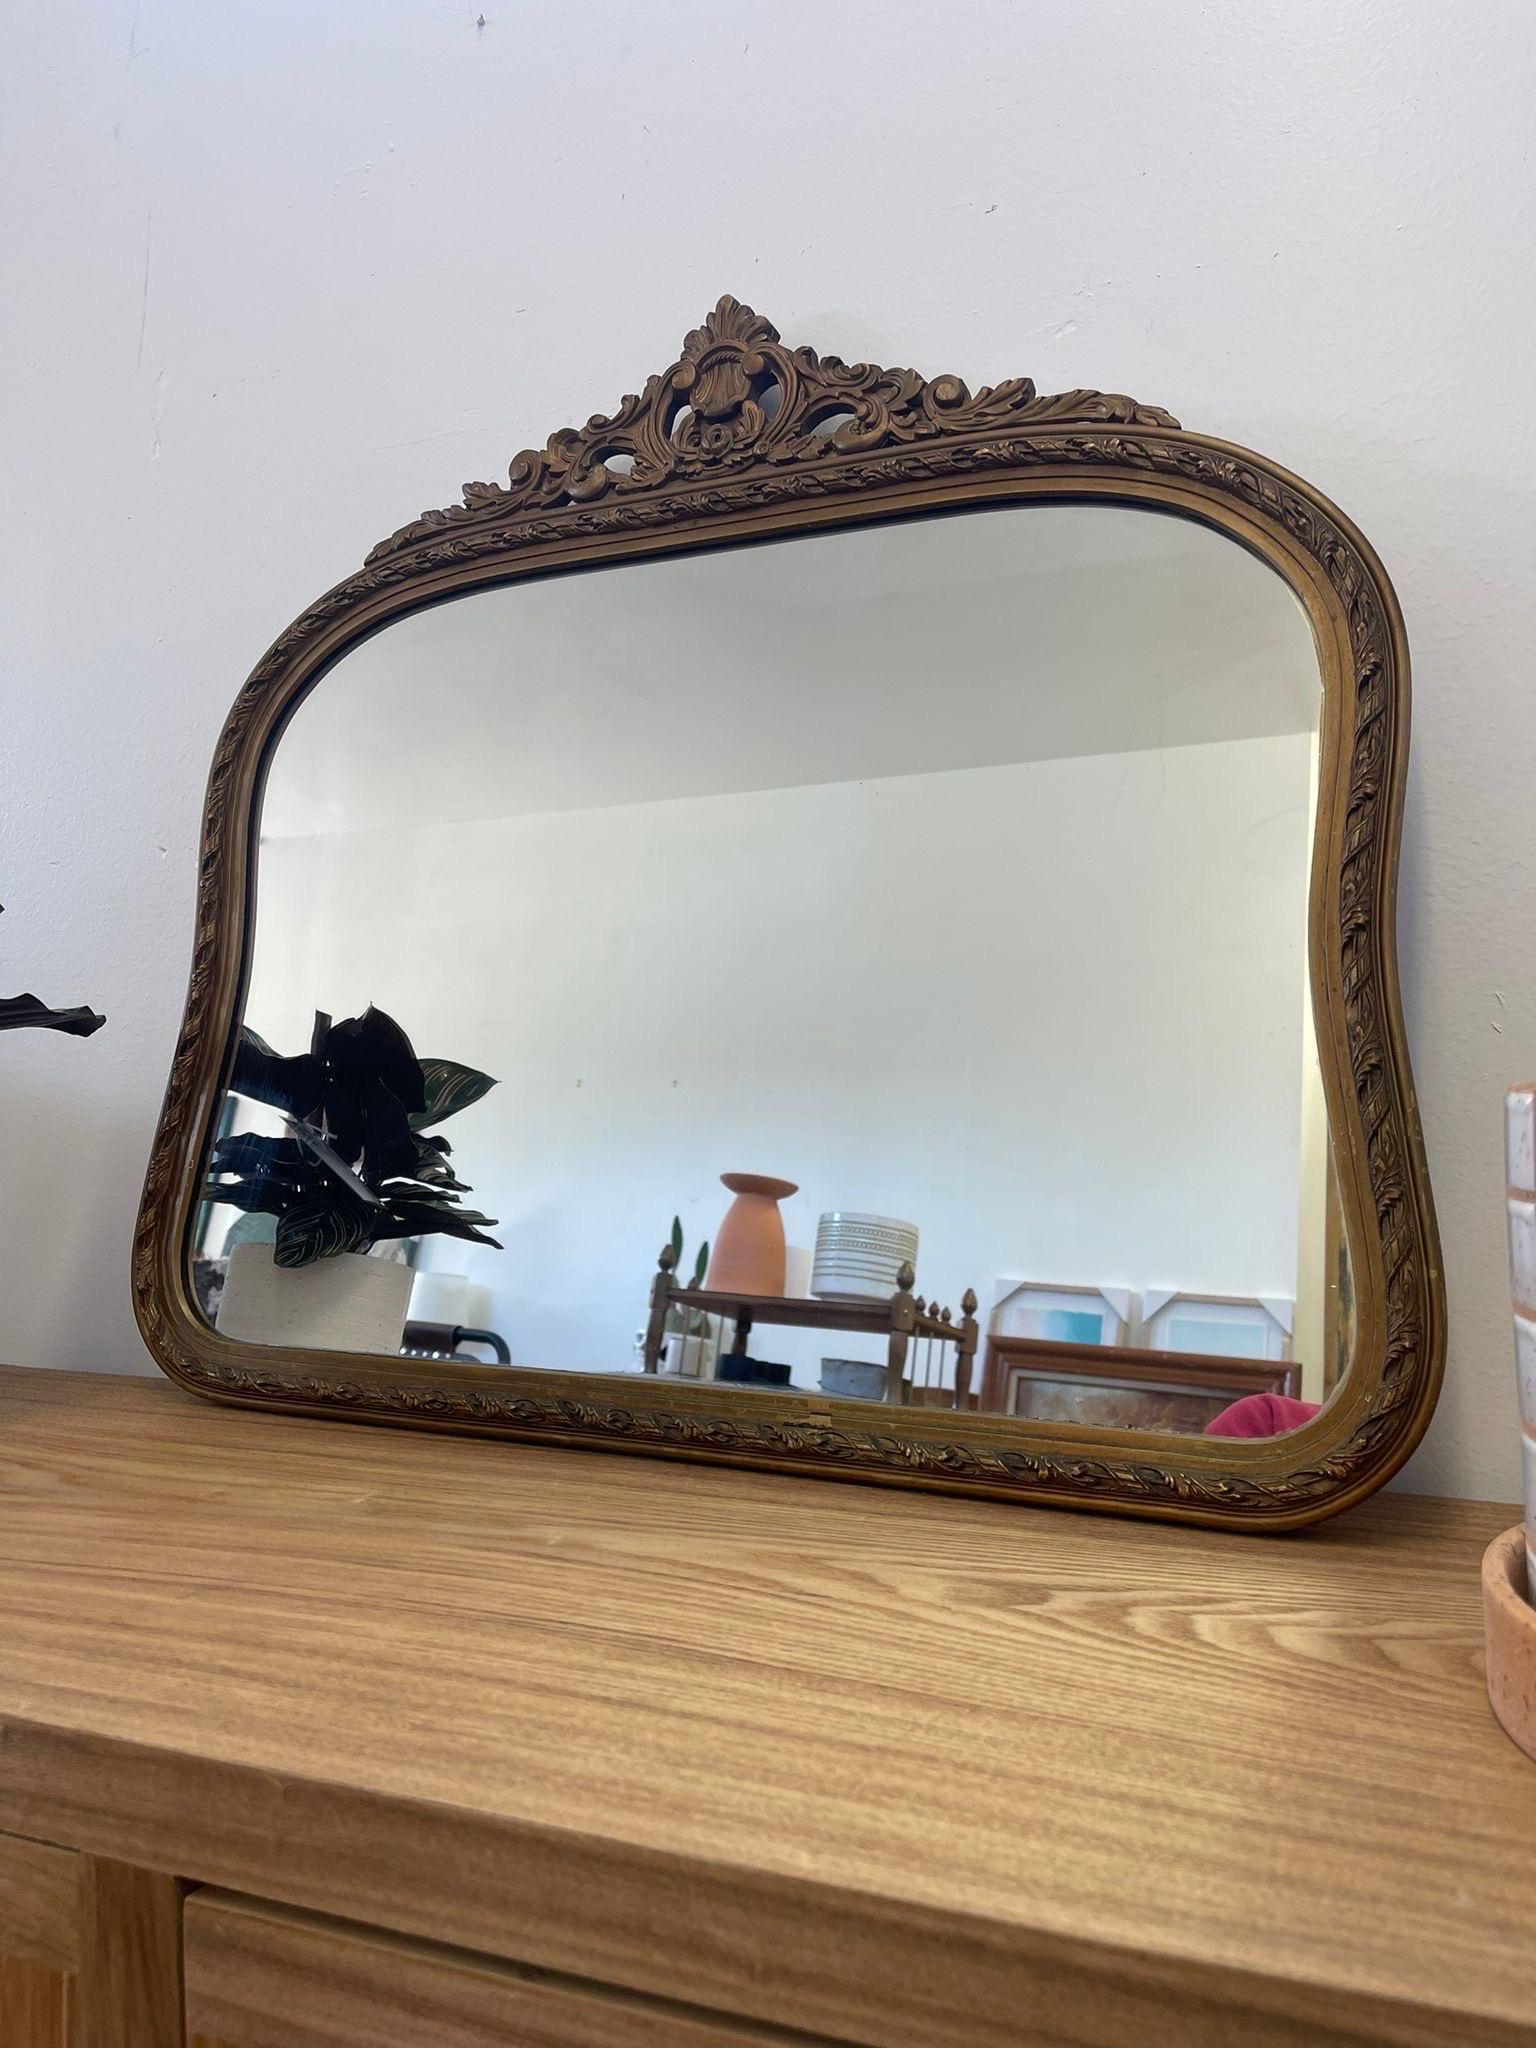 This Mirror has a beautifully unique shape, with an Arched top and slight bend to the sides. Rounded edge on the bottom, as well. Carved wood frame has been painted a gold tone. Stamp on the back reads August 29th 1940 as shown. Vintage Condition